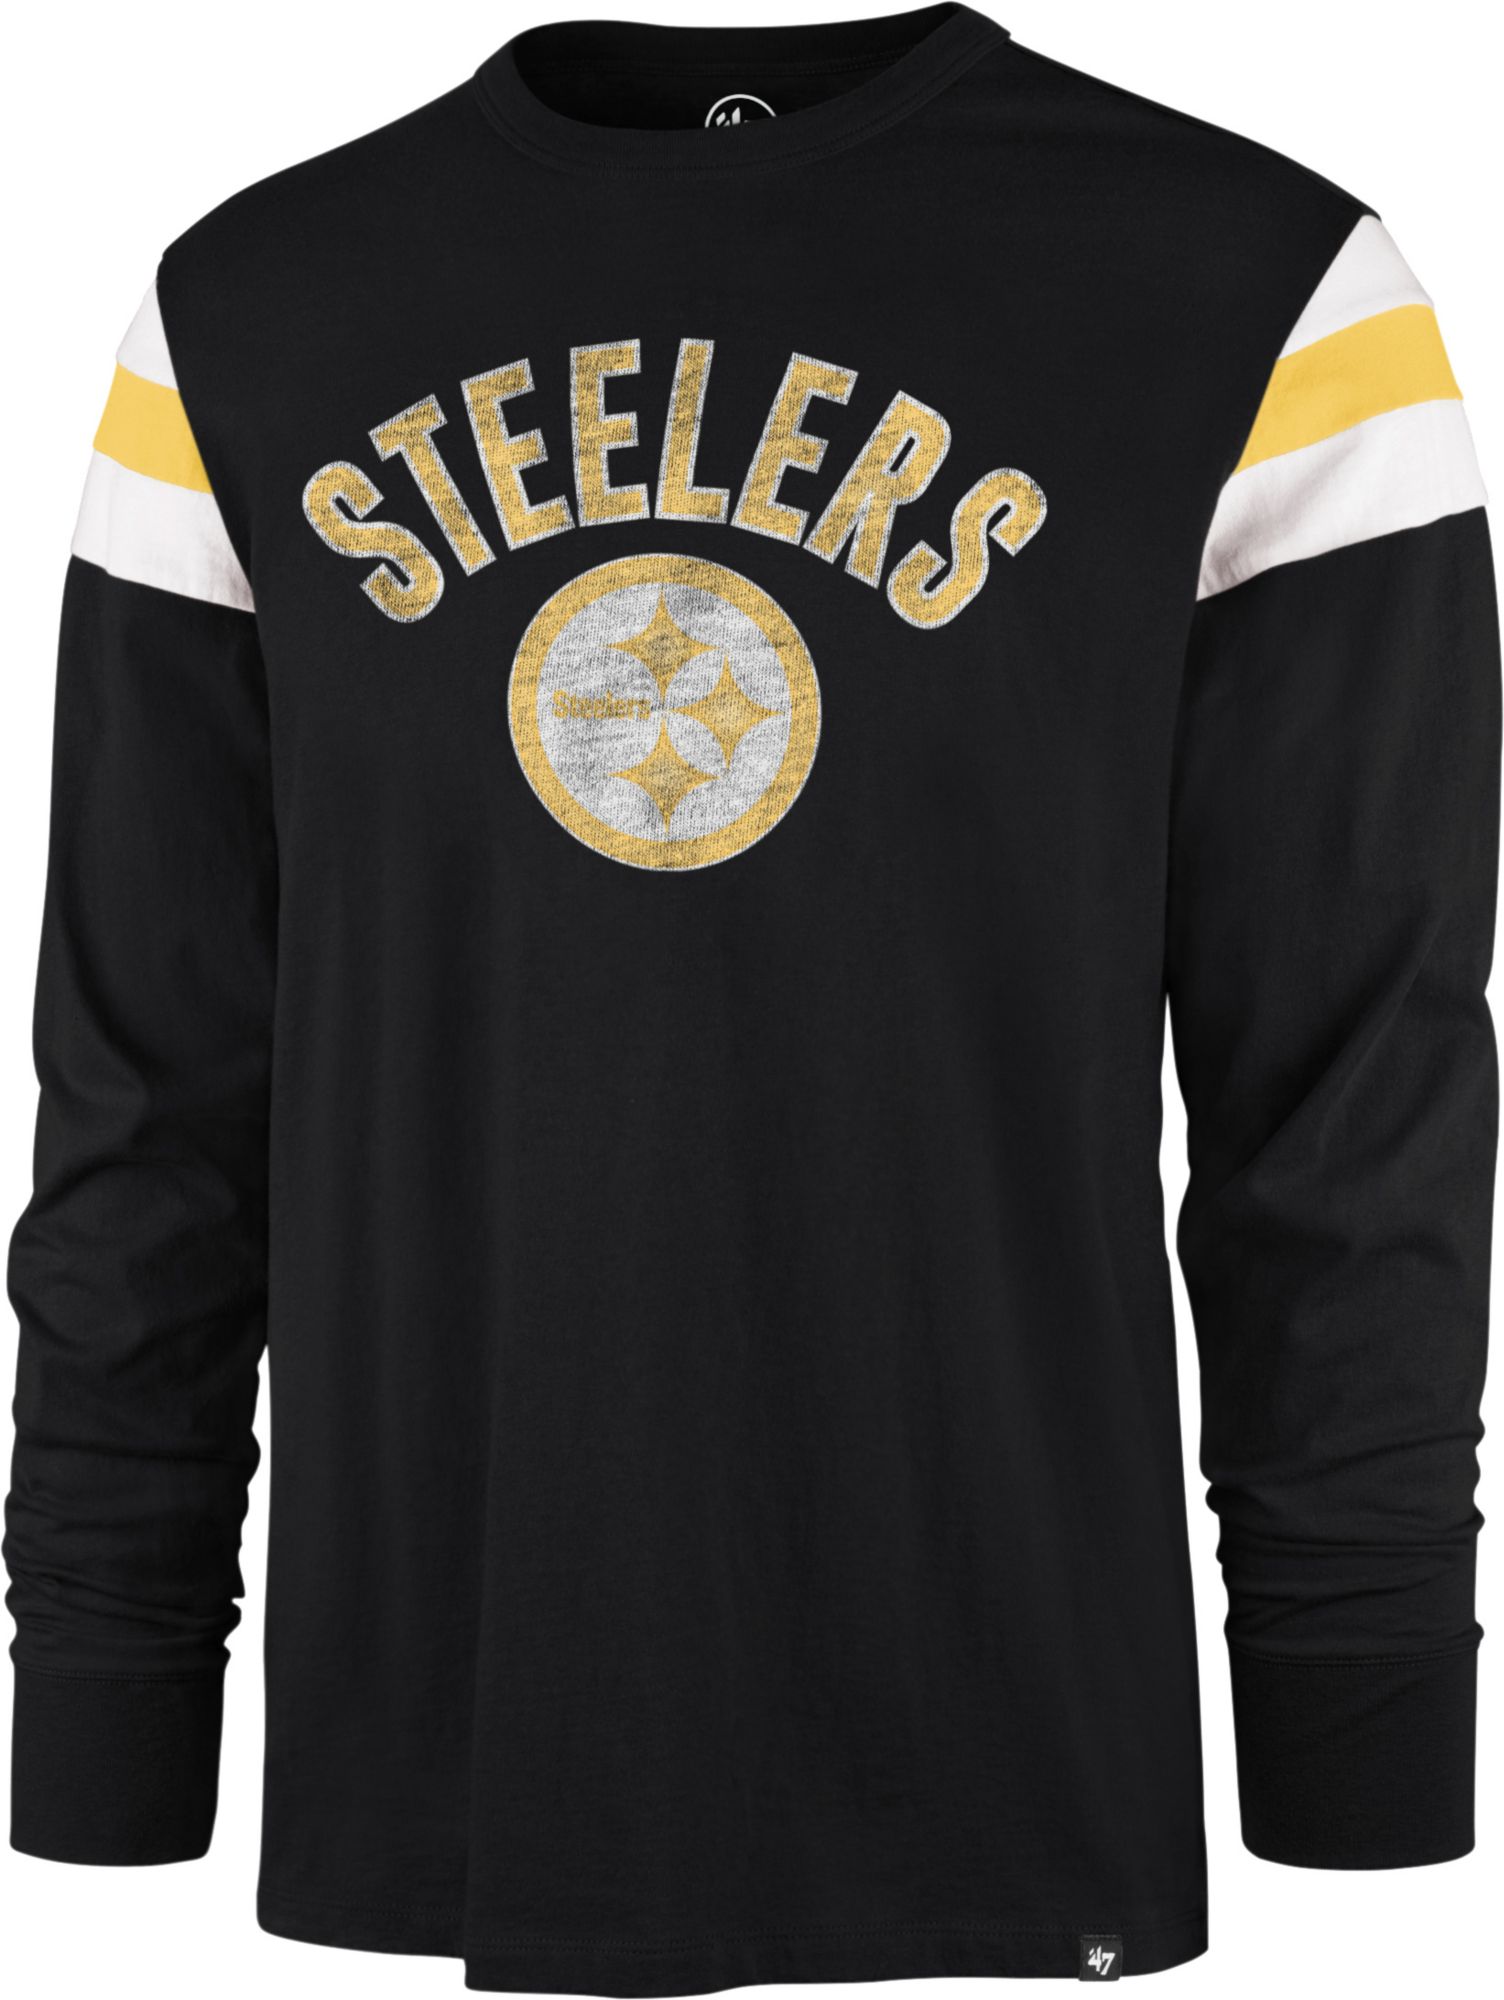 pittsburgh steelers clothing near me